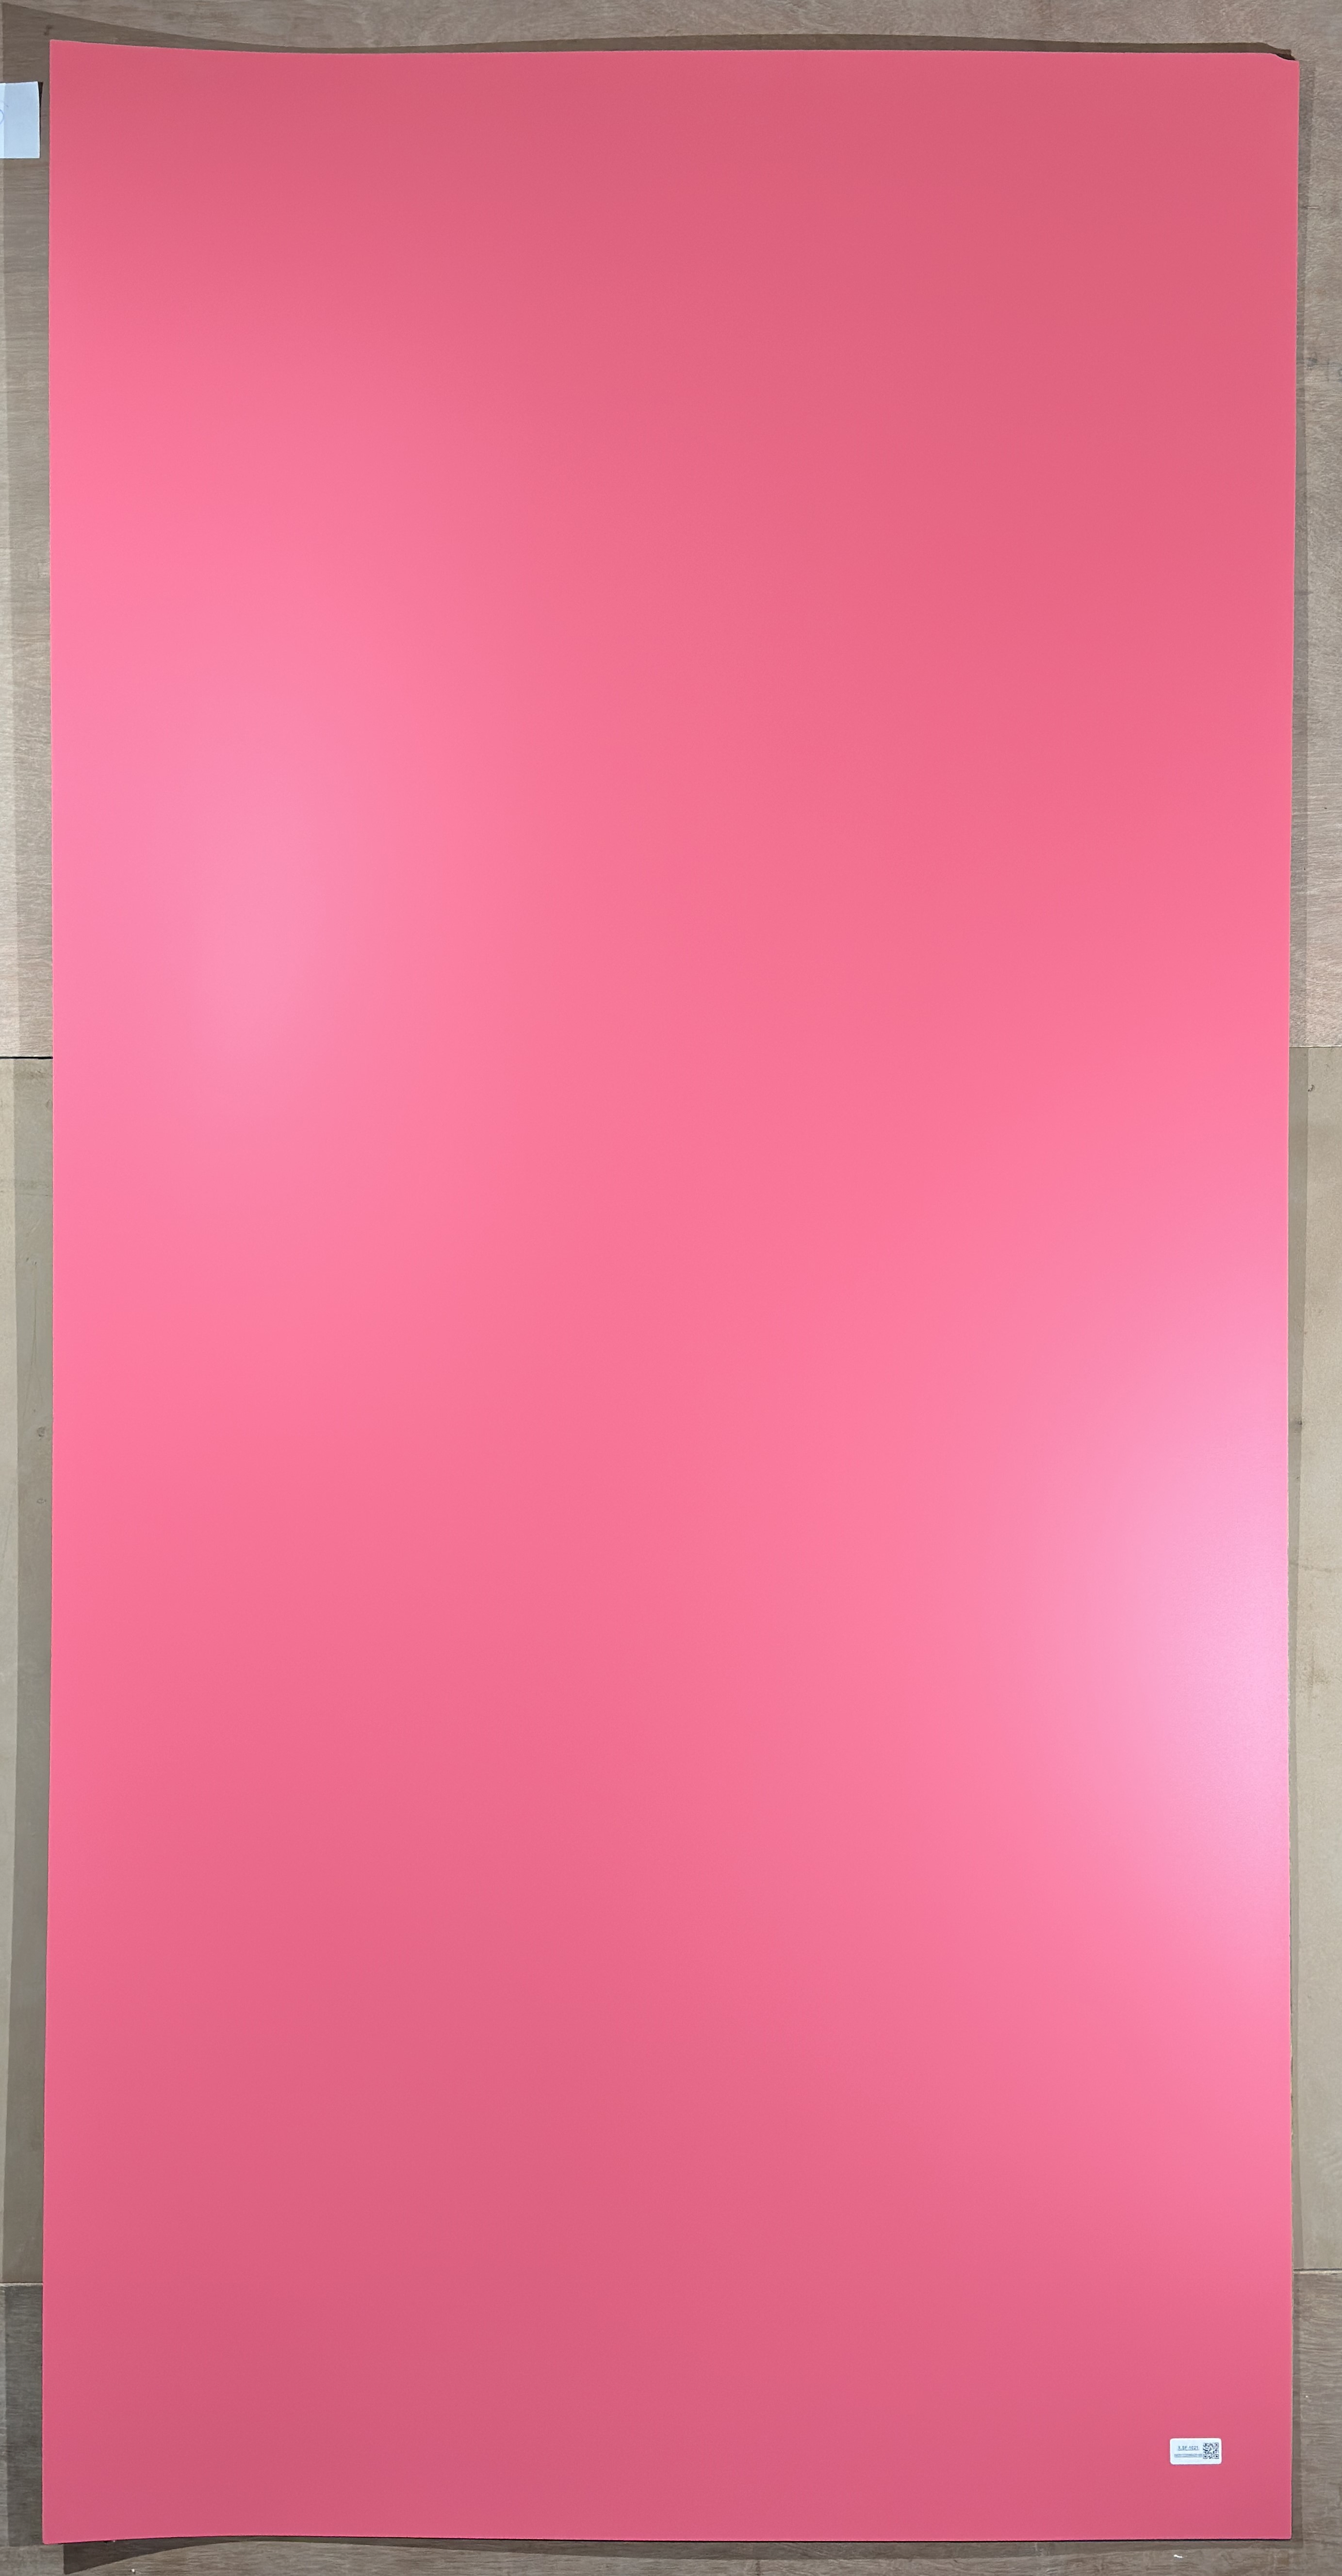 Material Depot laminates in bangalore - high quality image of a 80021 SF Pink Decorative Laminate from Pulp Decor with Suede finish